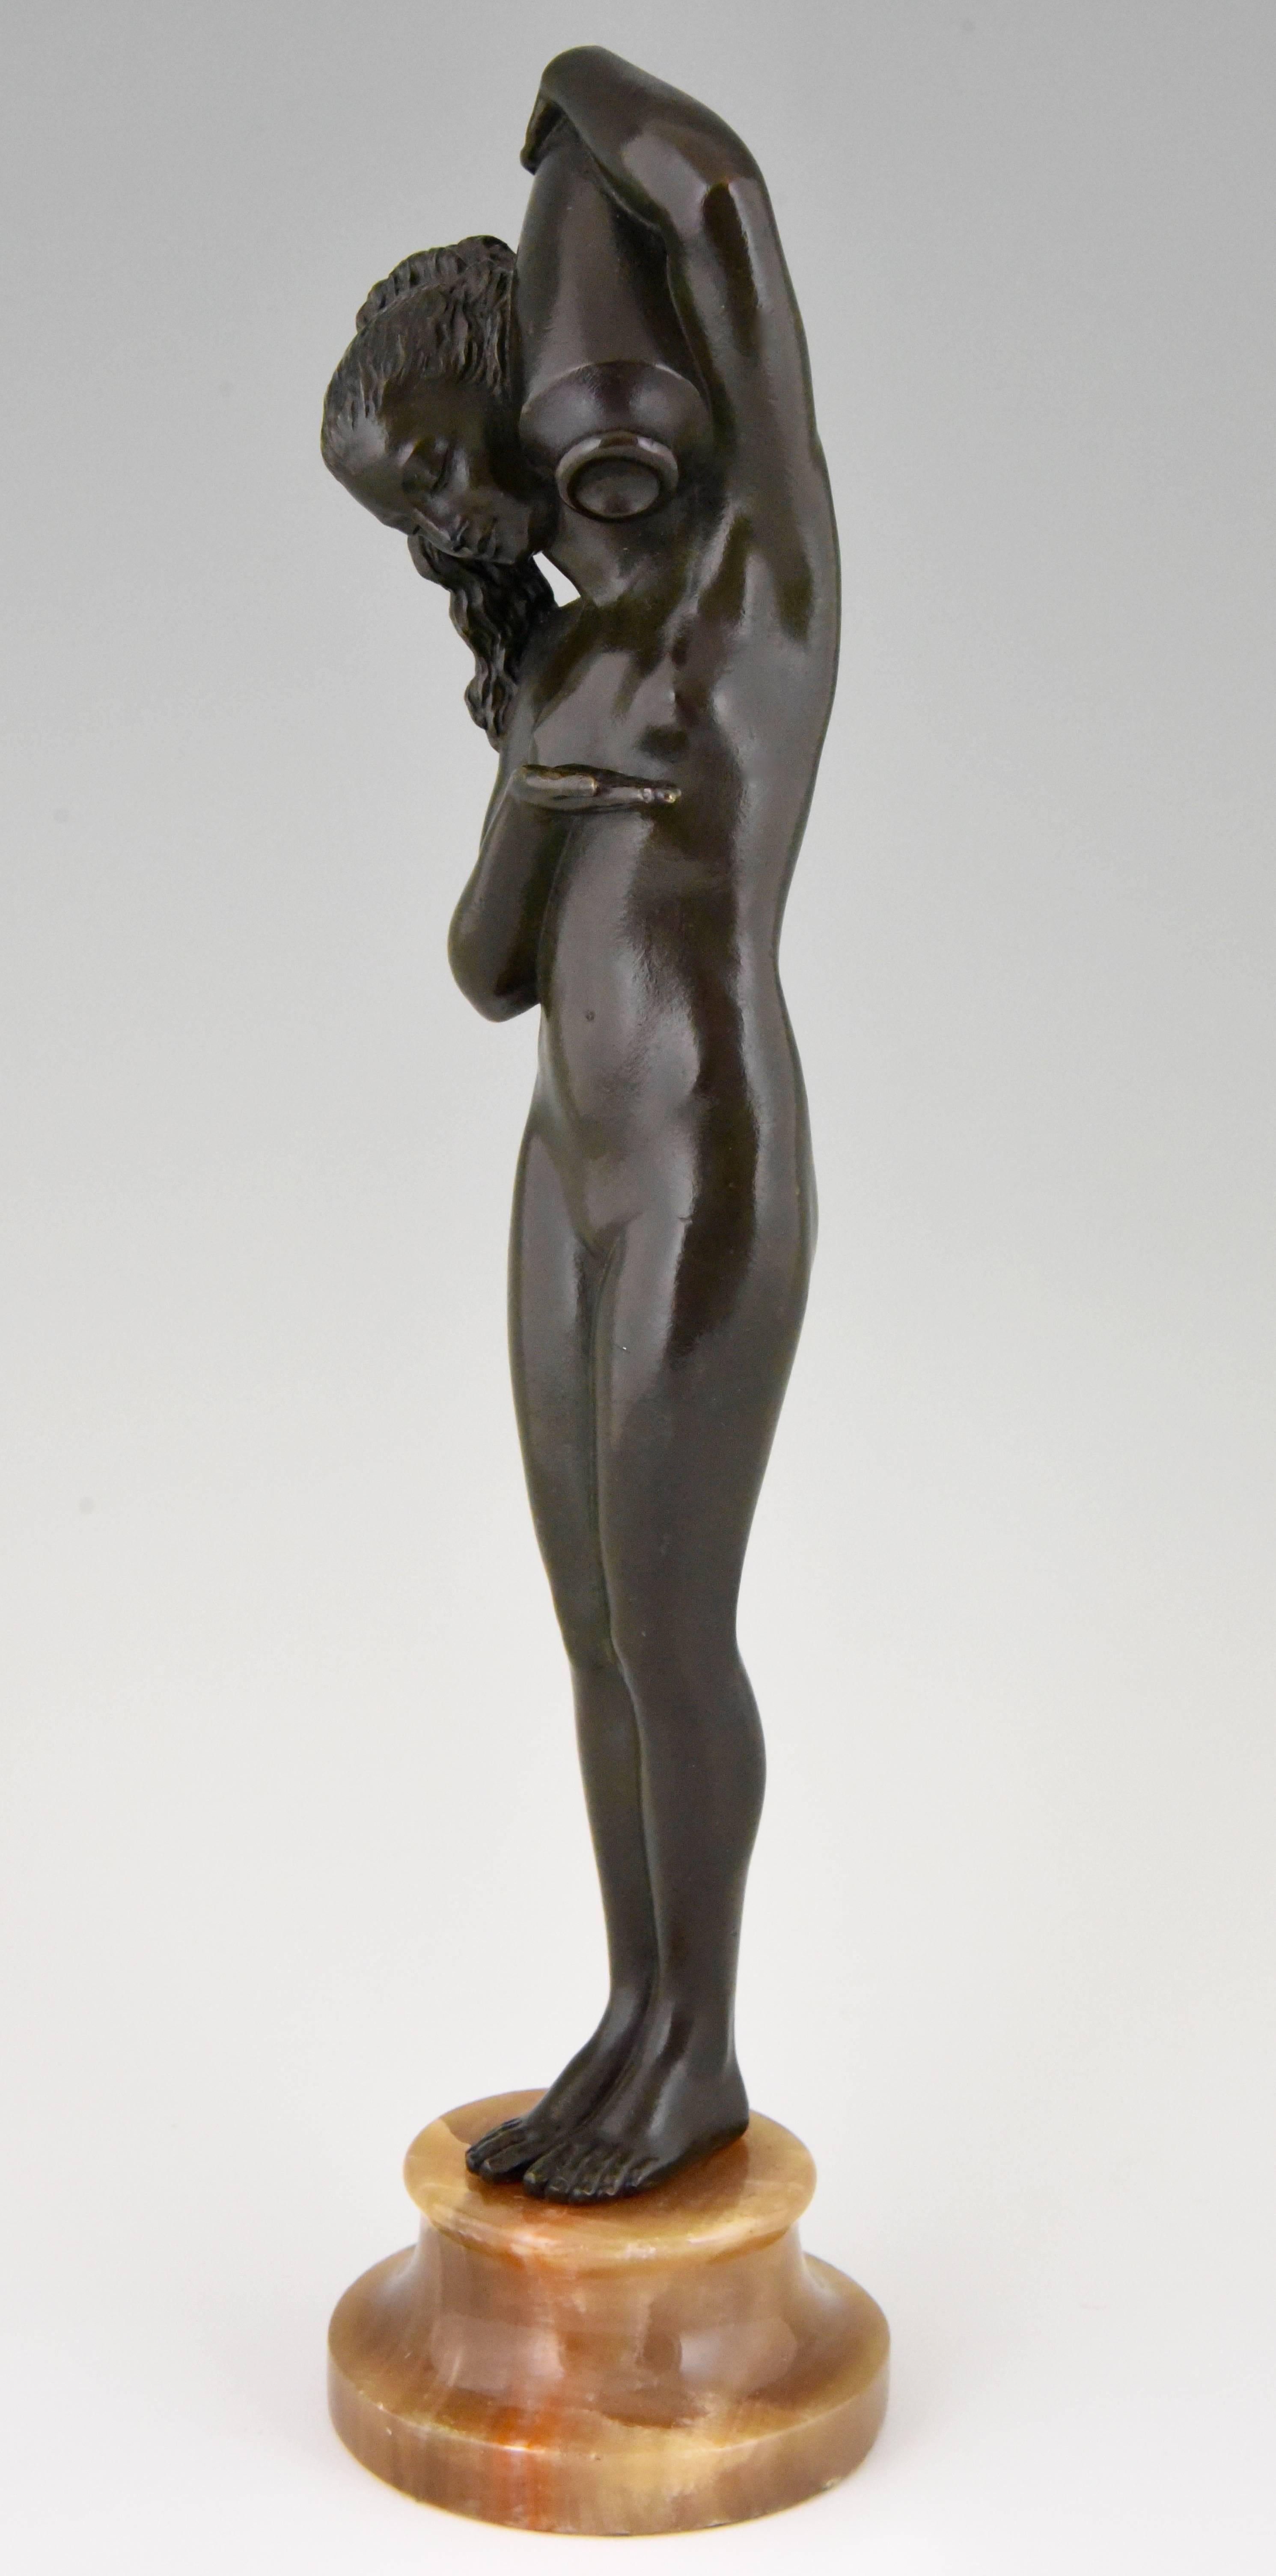 Description: Art Deco bronze sculpture of a nude with jar.
Artist/ Maker: Attributed to Raymonde Guerbe. The wife of Pierre Le Faguays.
Signature/ Marks: Unsigned.
Style: Art Deco.
Date: 1925.
Material: Patinated bronze. Onyx base.
Origin: